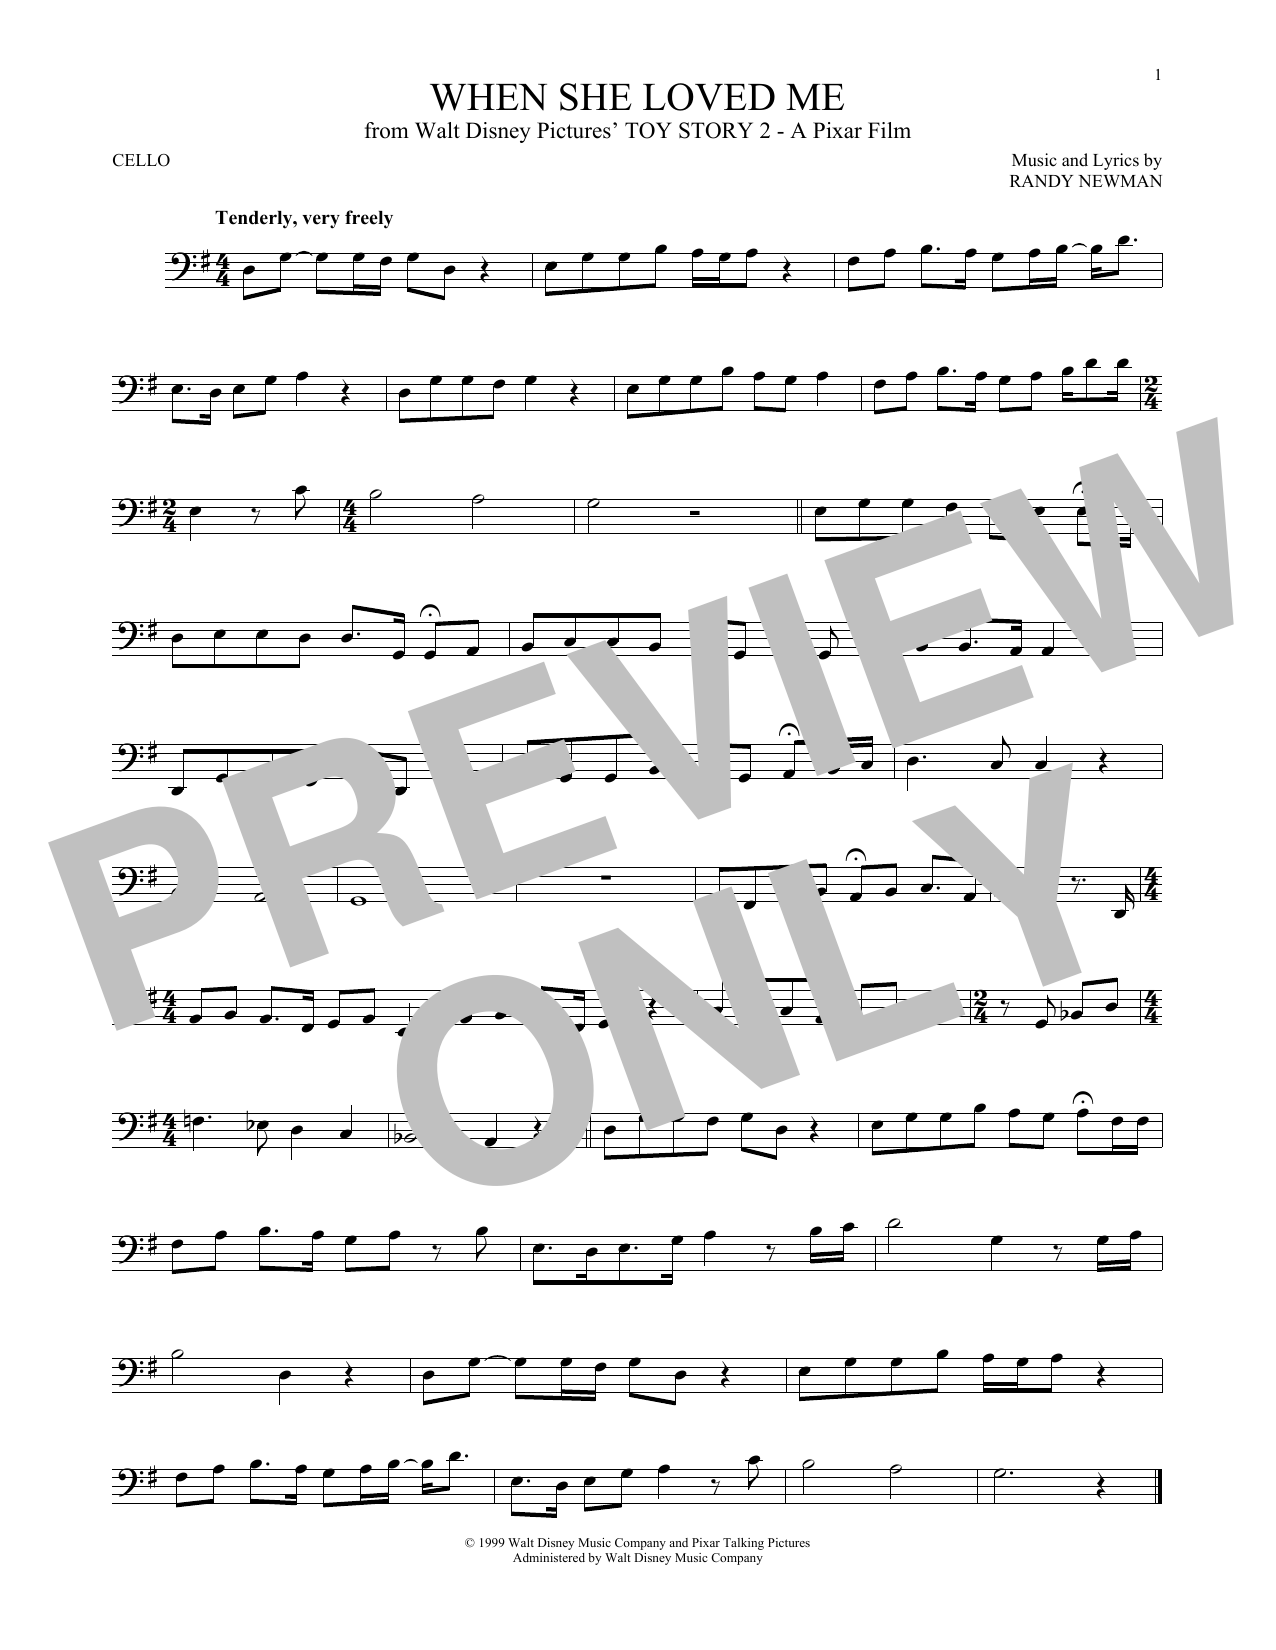 Download Sarah McLachlan When She Loved Me (from Toy Story 2) Sheet Music